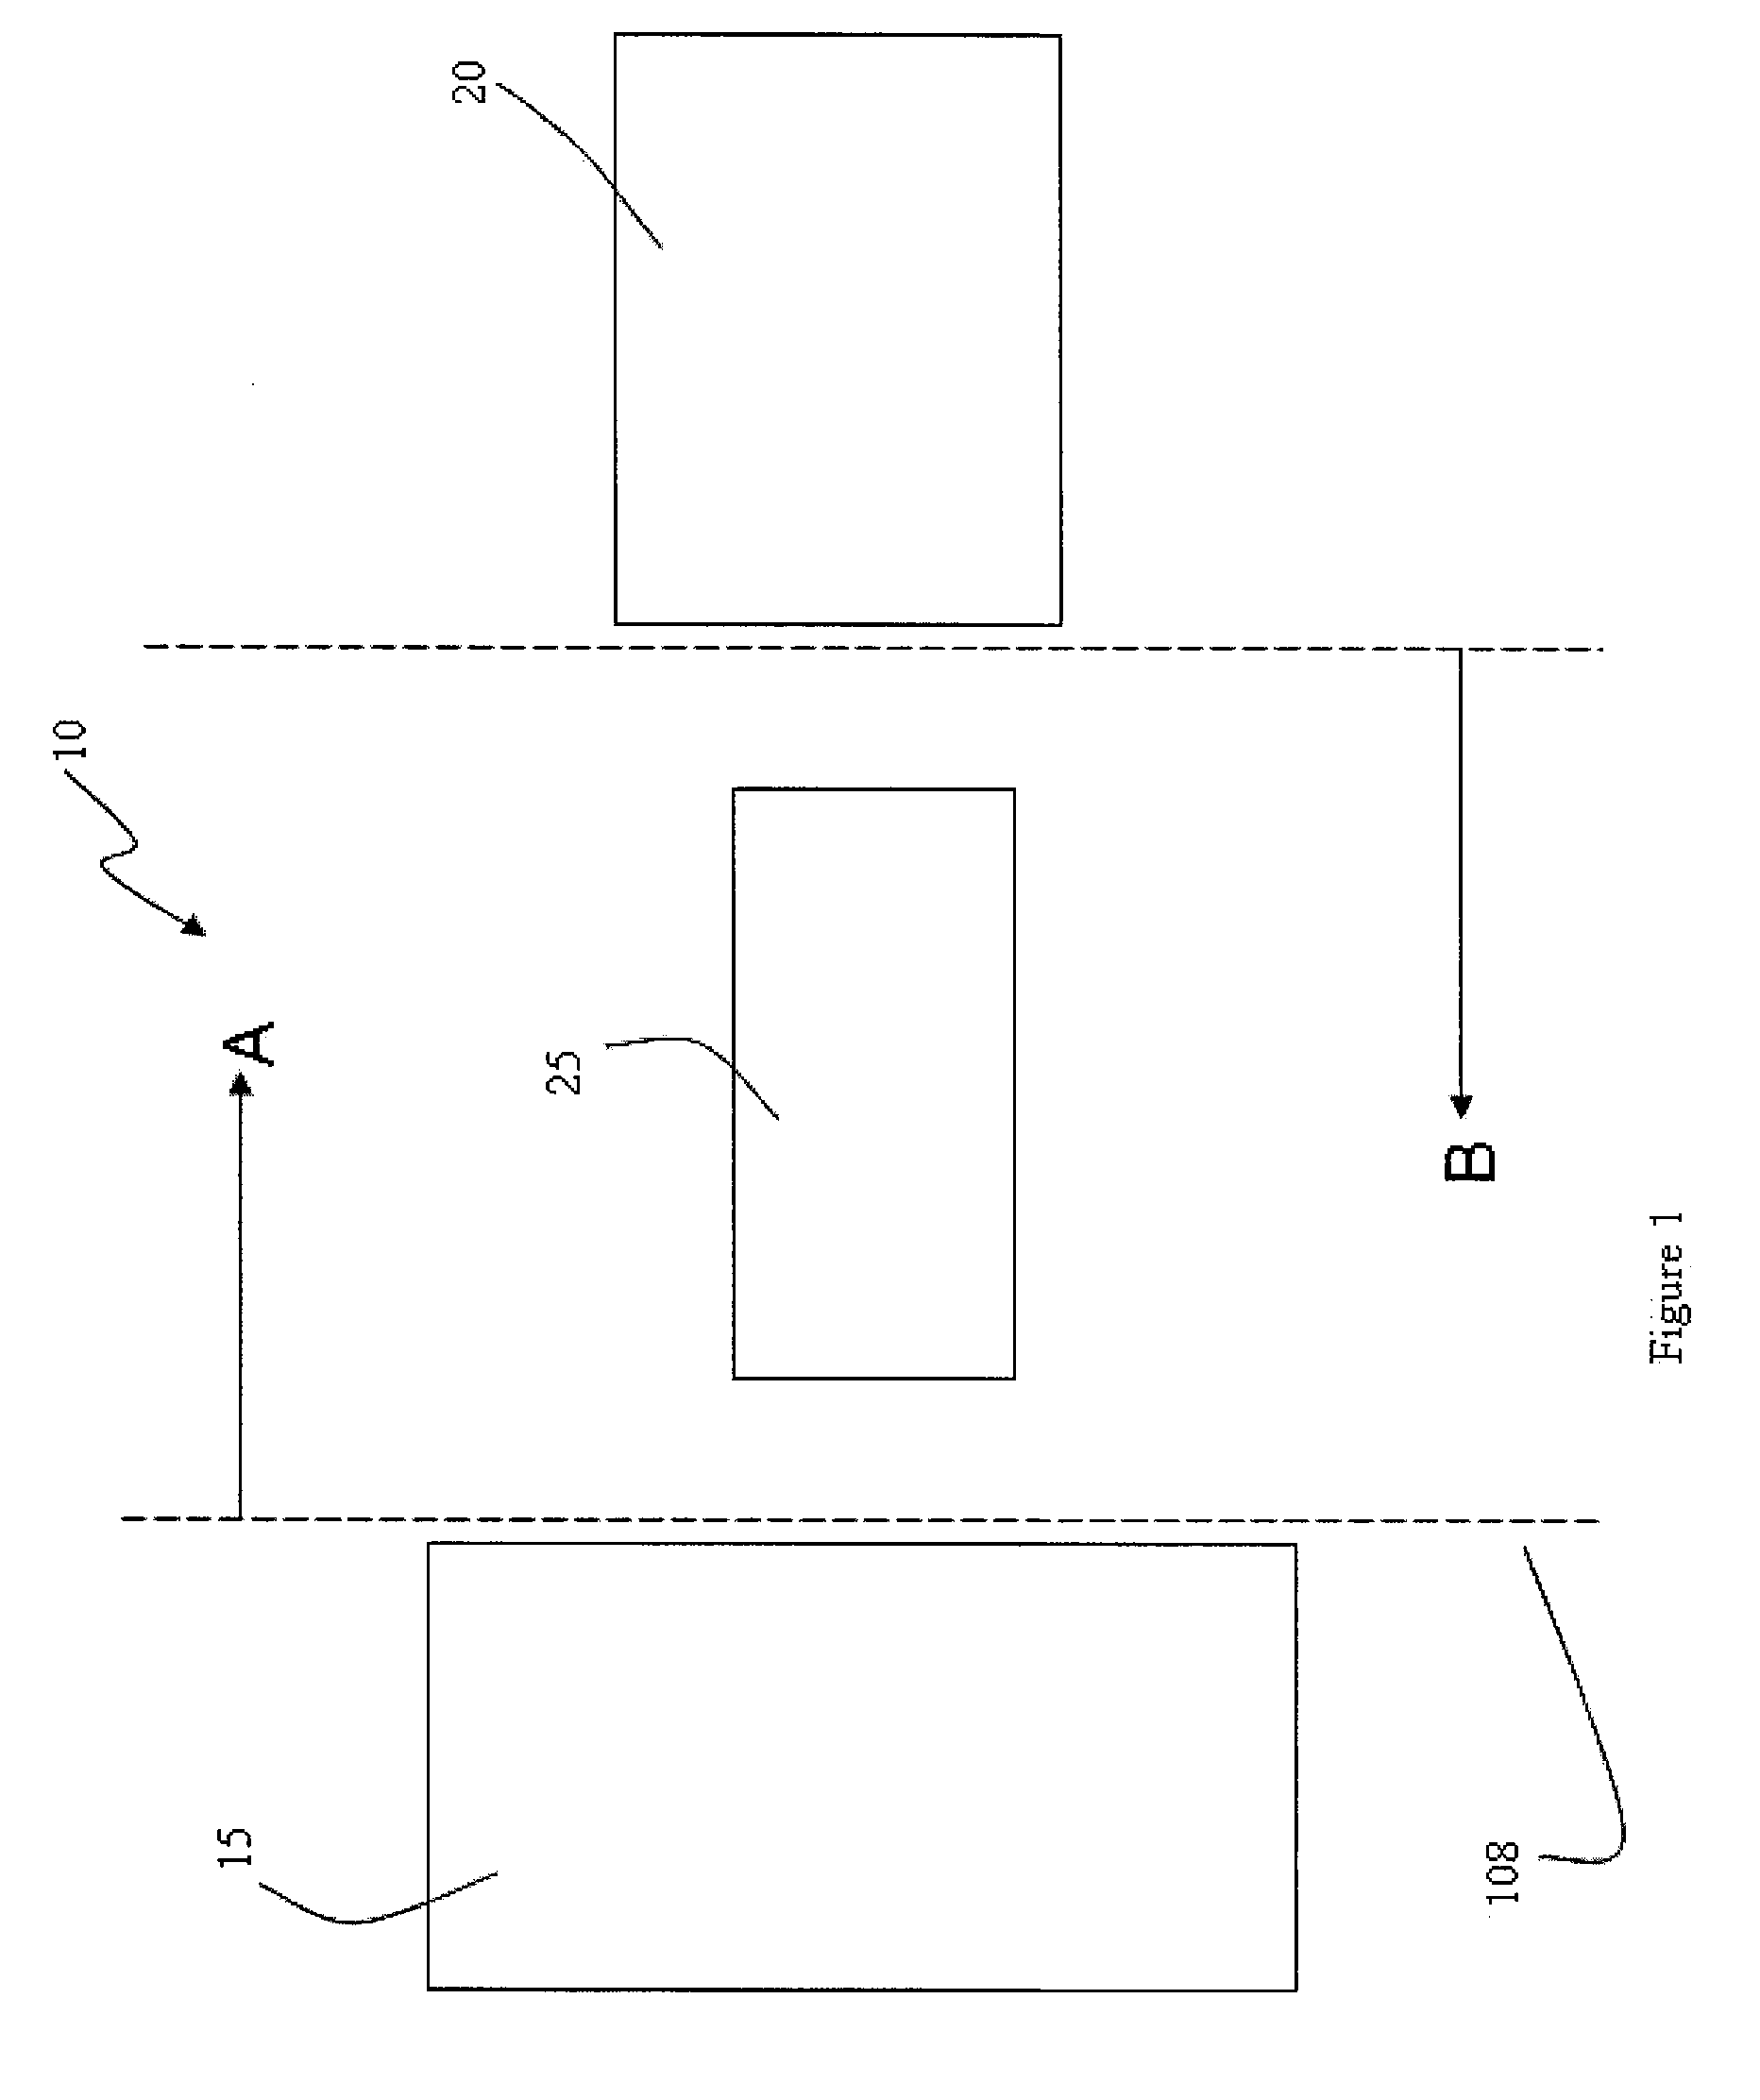 Method and Systems for Interfacing With PCI-Express in an Advanced Mezannine Card (AMC) Form Factor